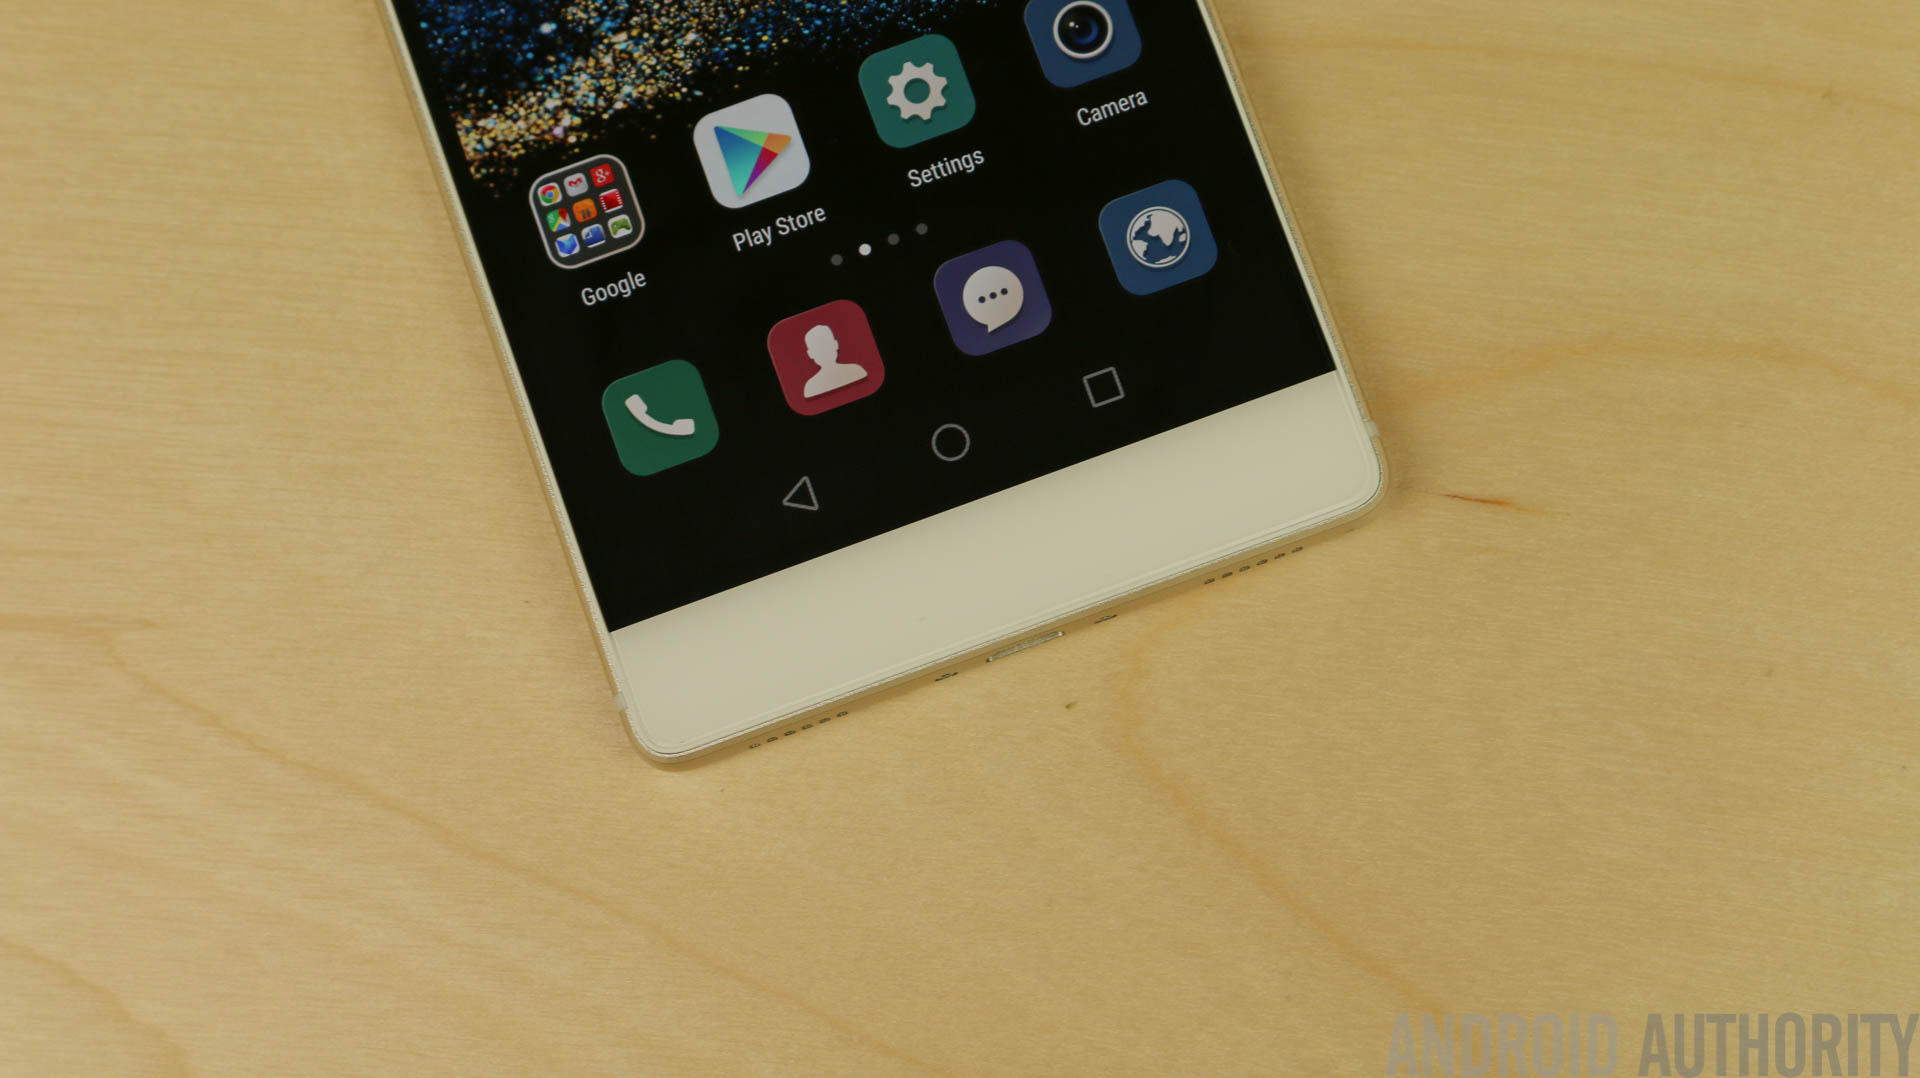 Huawei-P8-Hands-On3